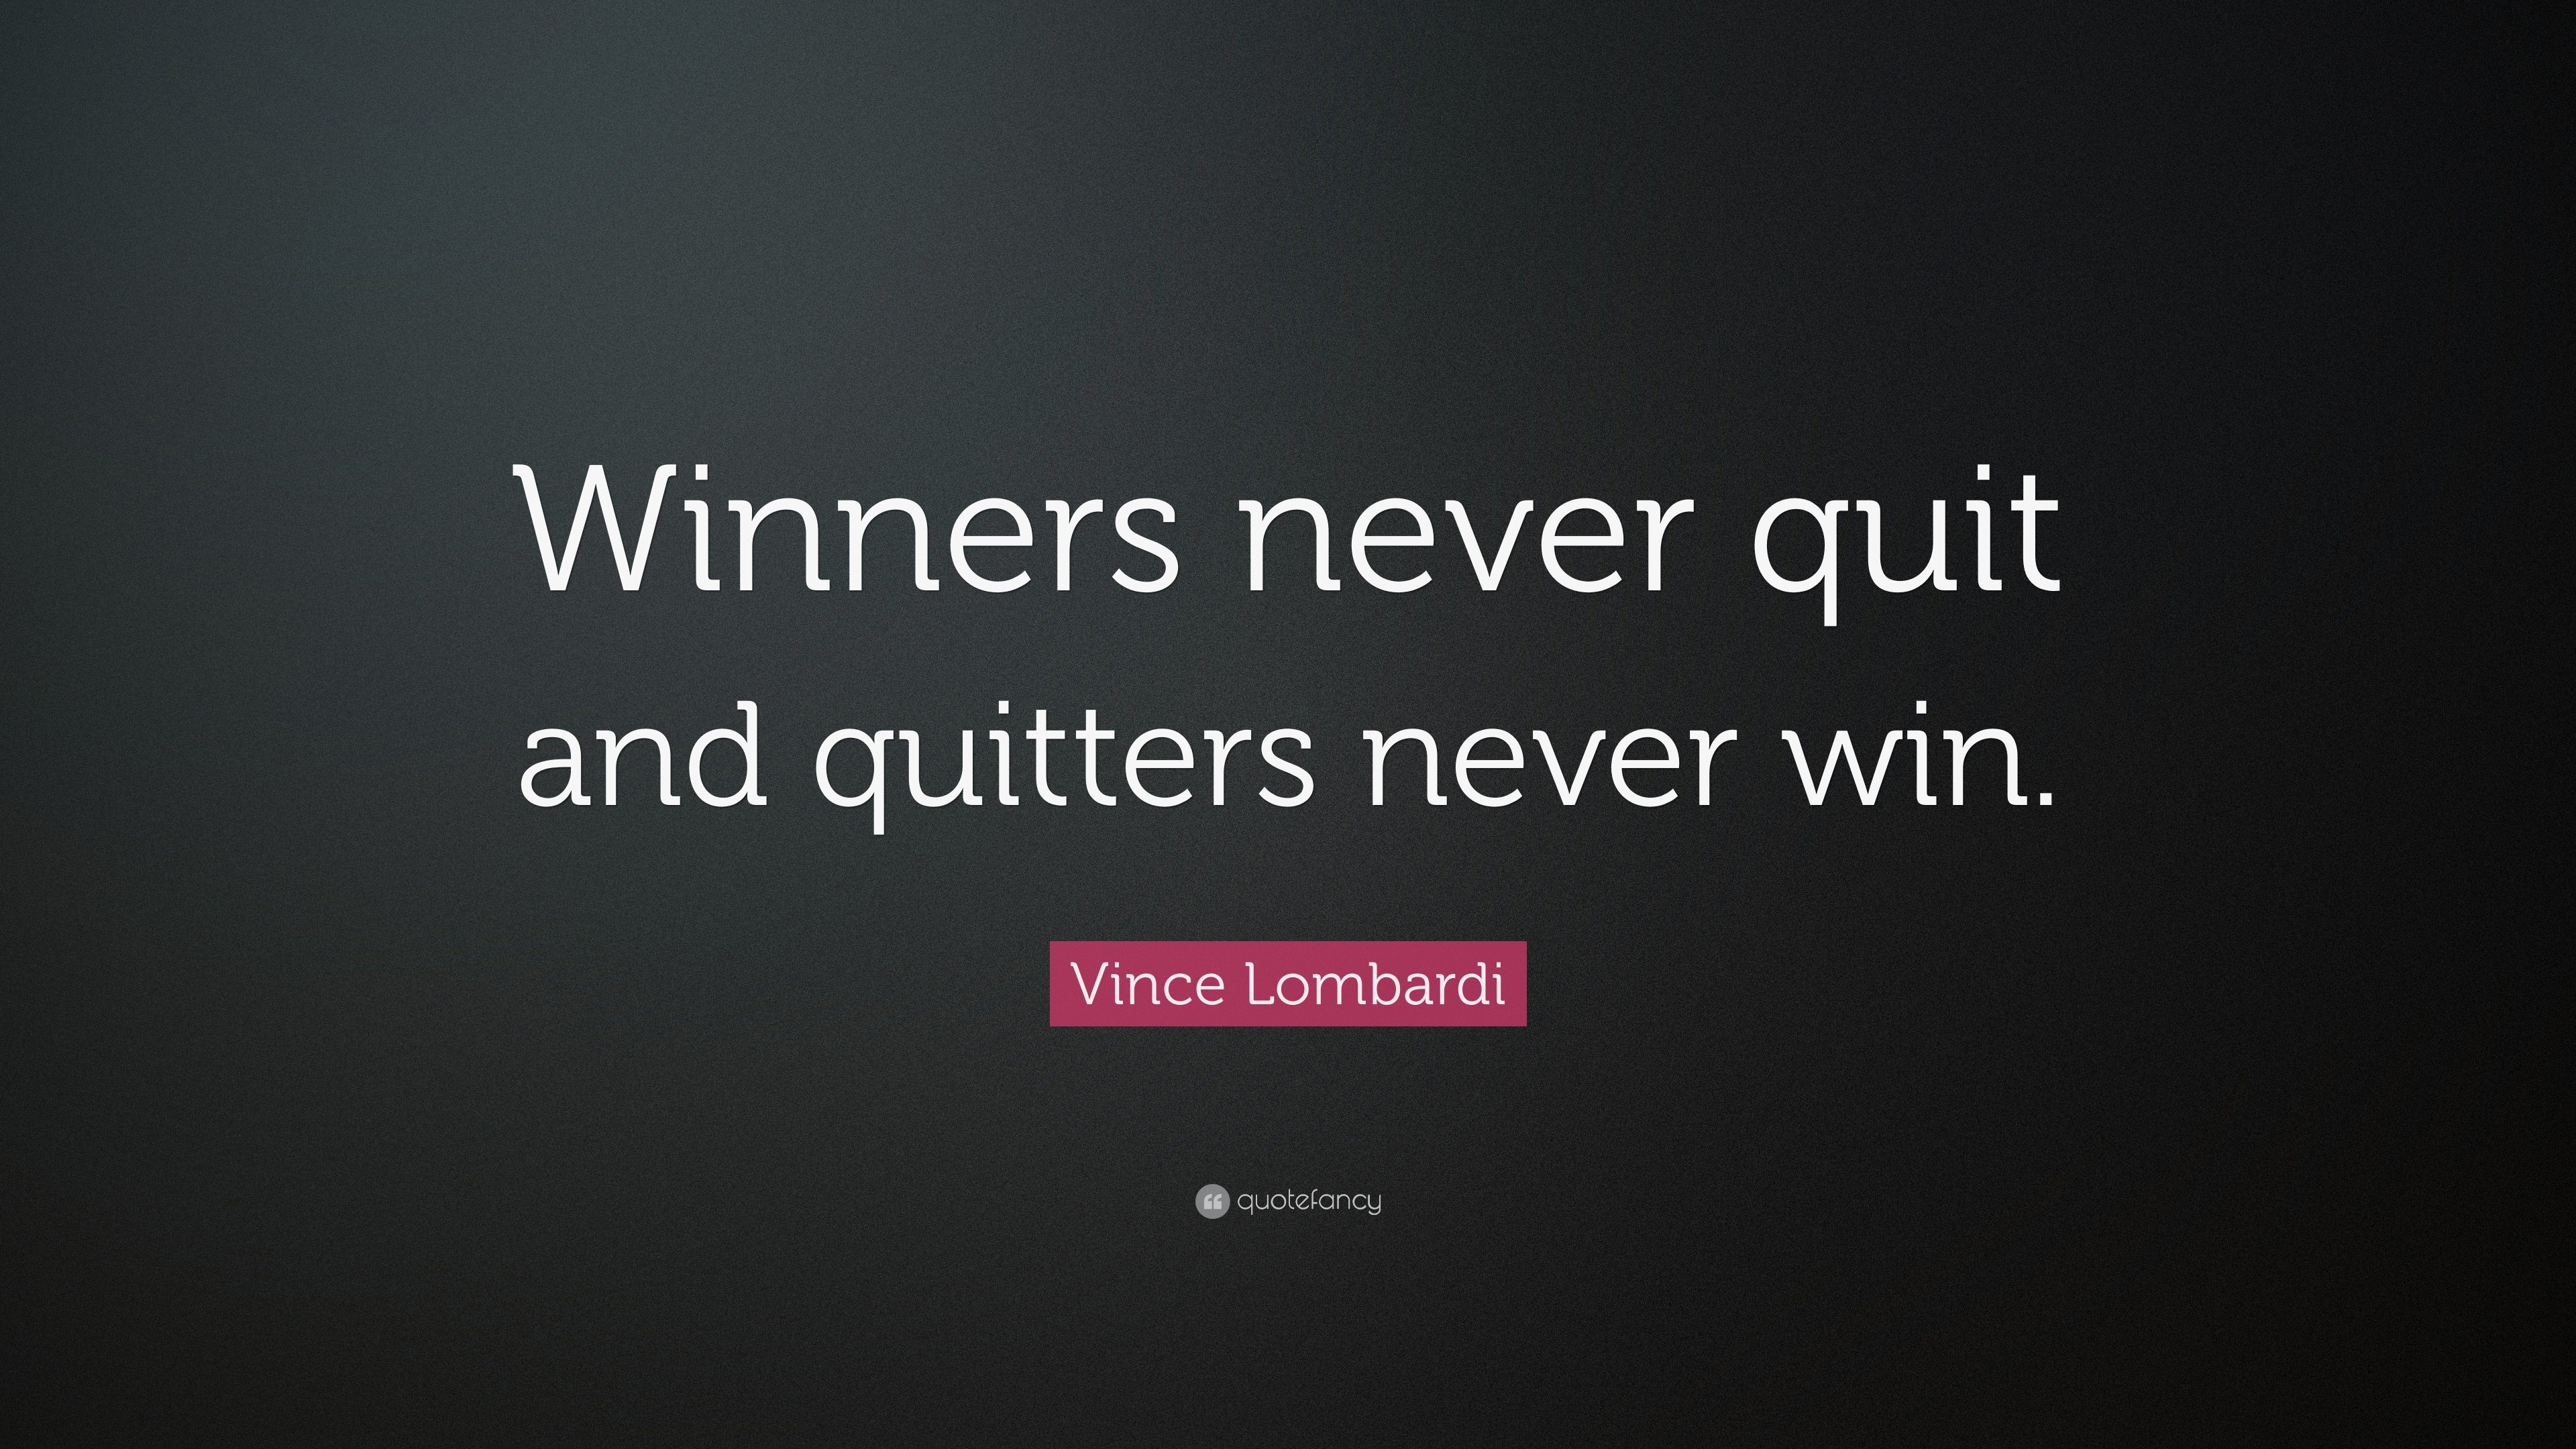 Vince Lombardi Quote: “Winners never quit and quitters never win.” (25